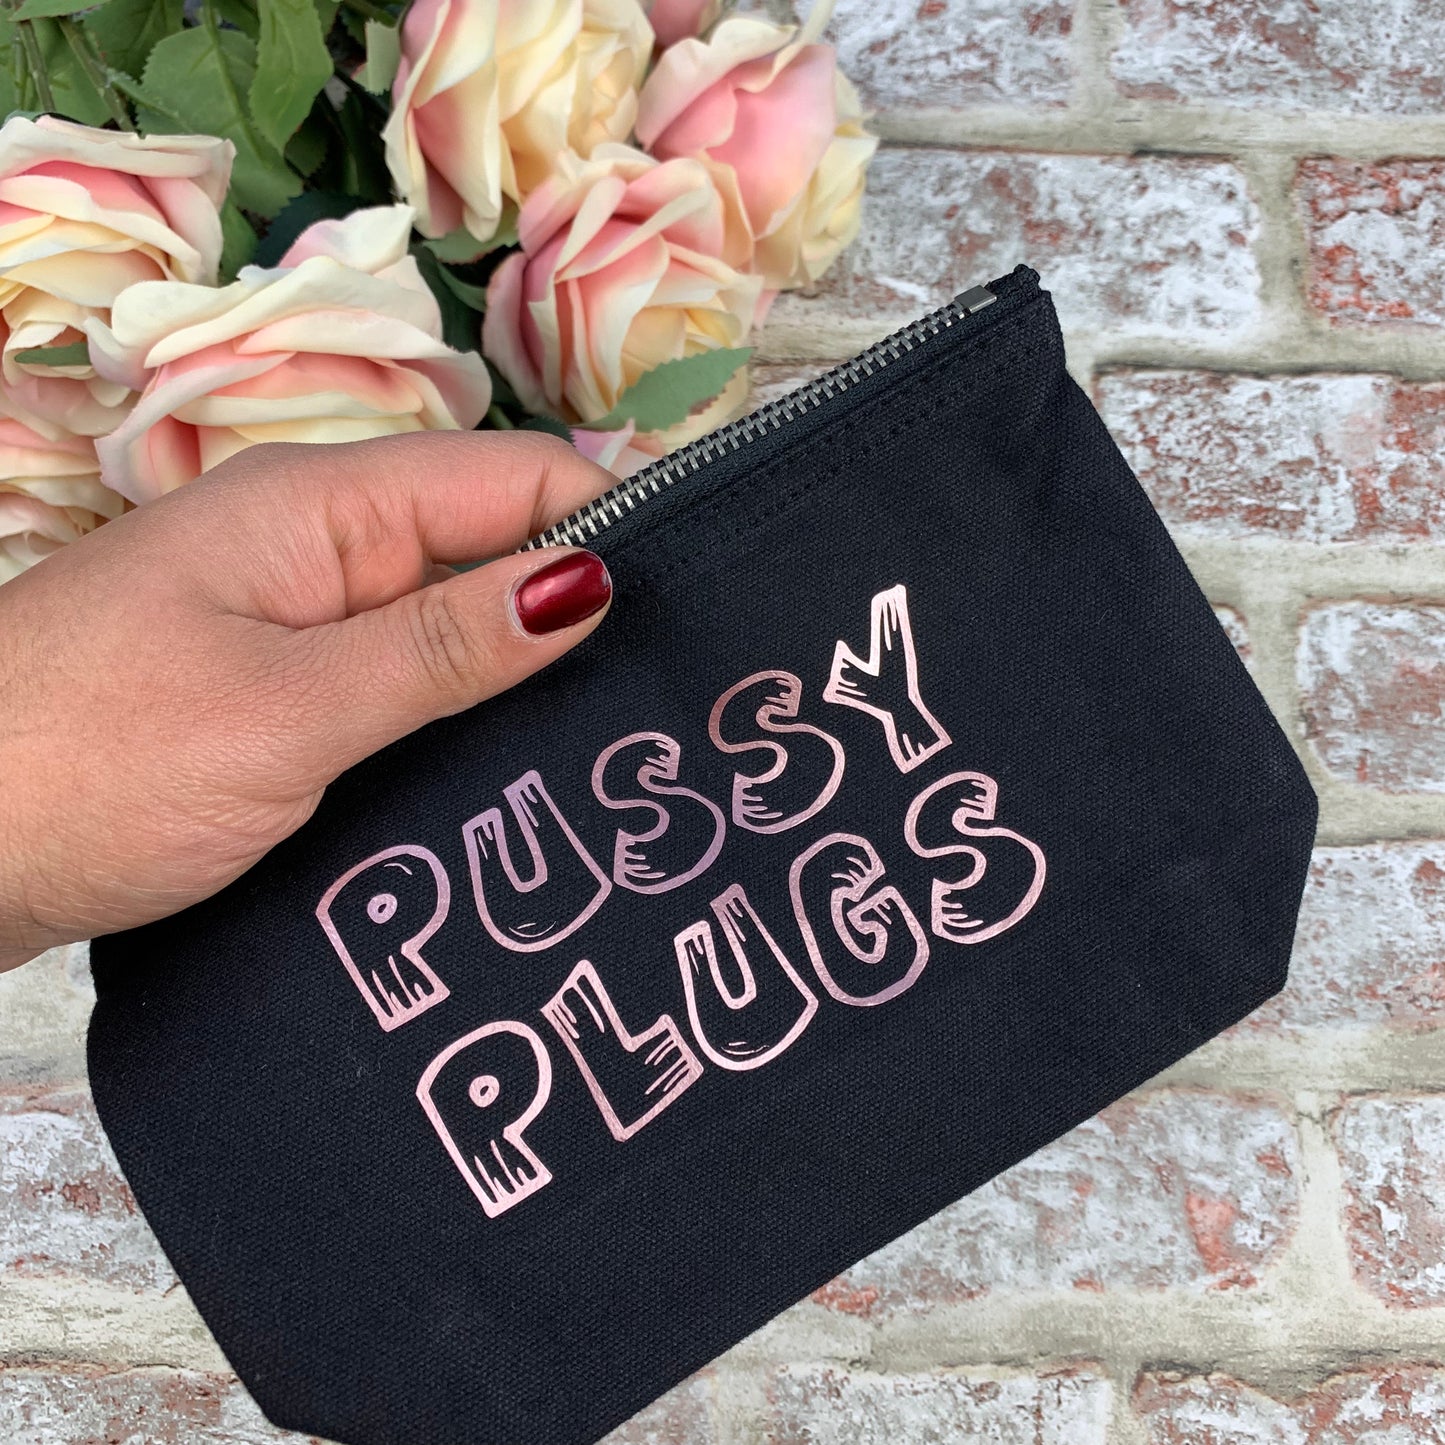 Pussy Plugs - Tampon, pad, sanitary bag / Period Pouch